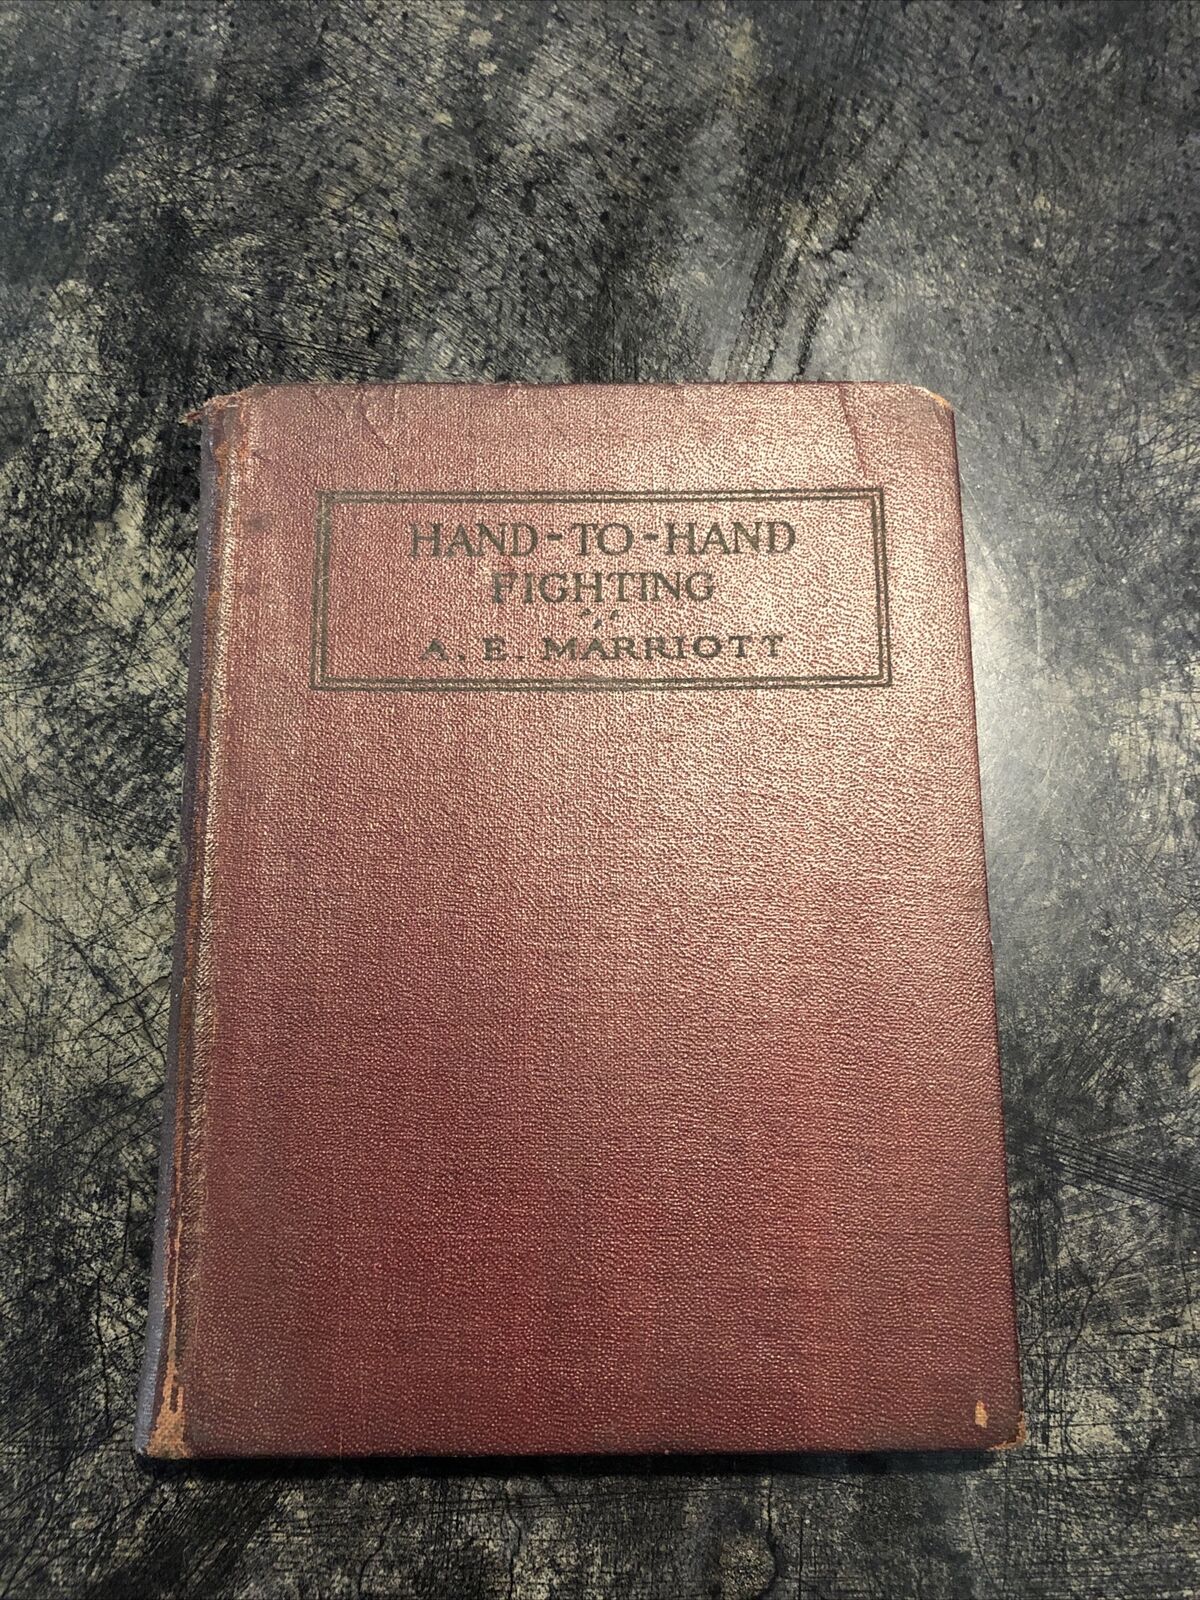 WWI Hand-To-Hand Fighting Personal Defense For Soldier A E Marriott 1918 1st Ed.